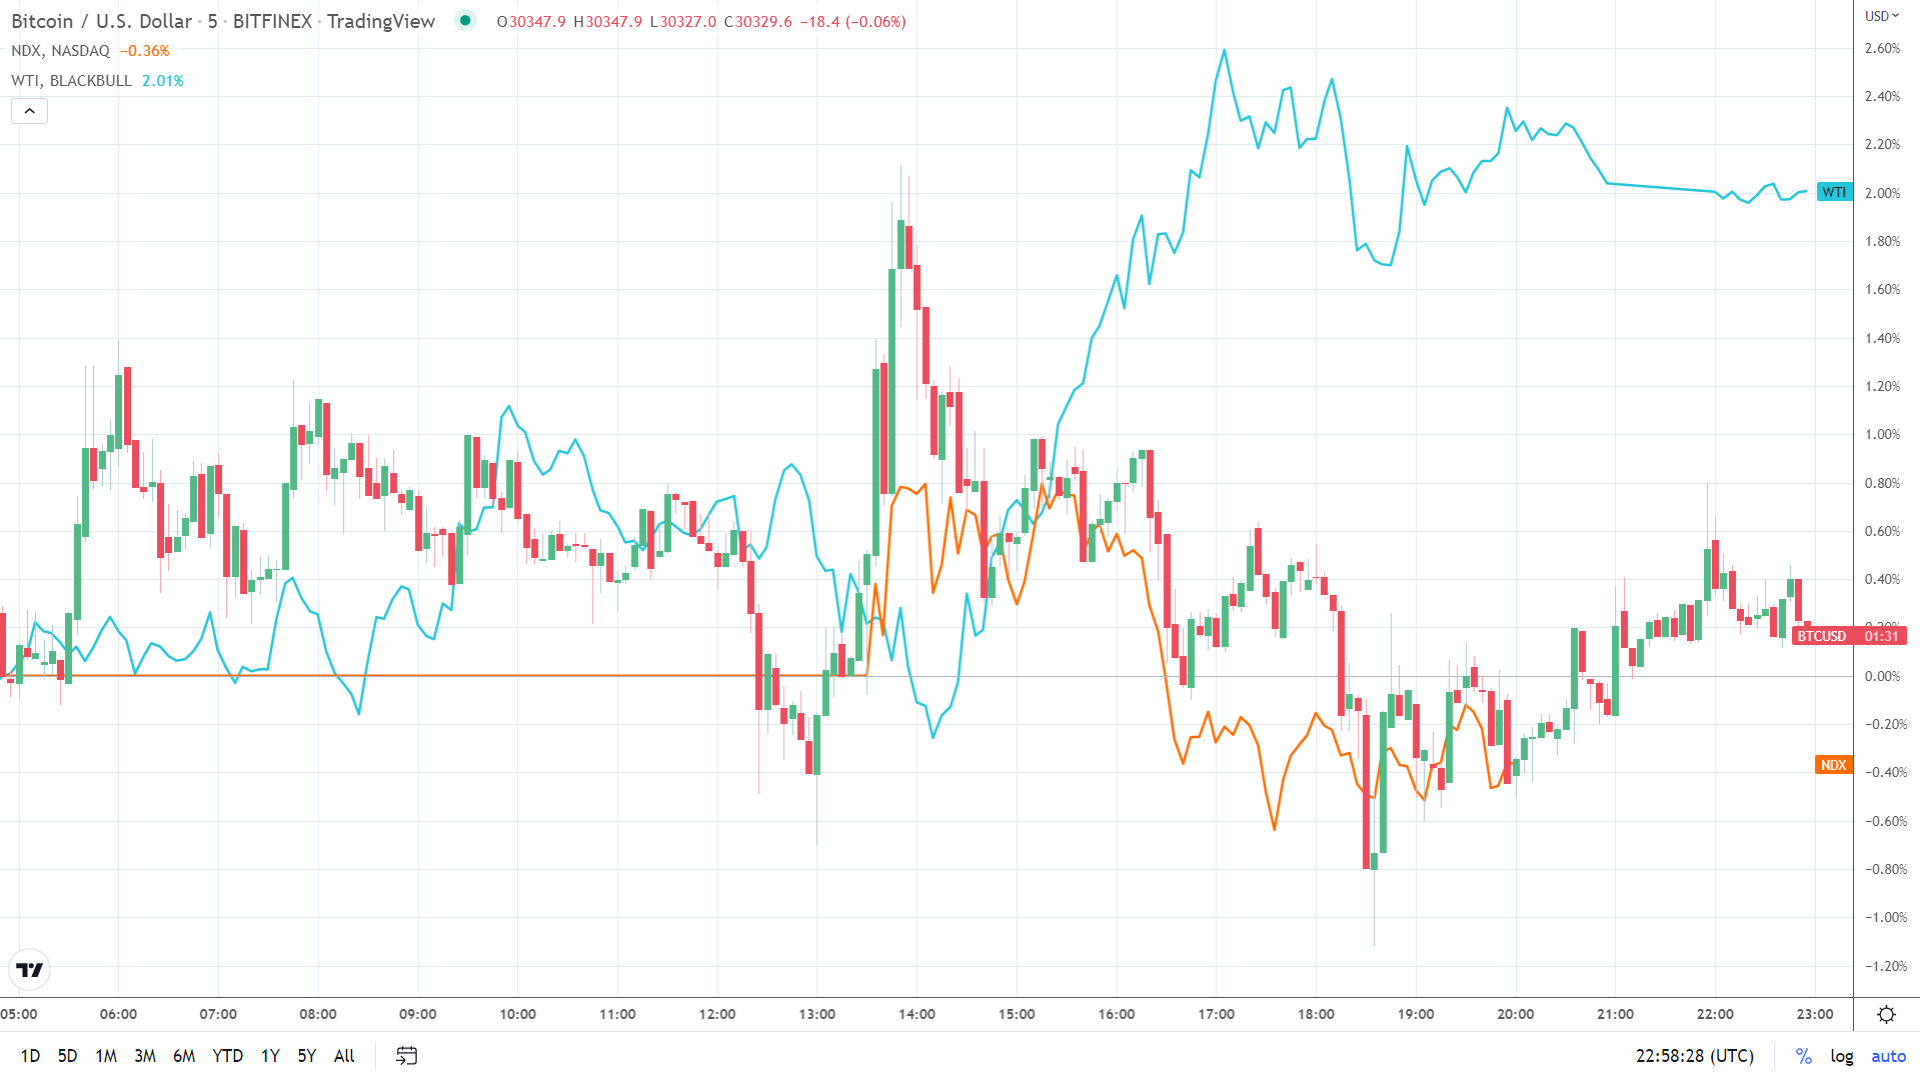 BTC and NASDAQ inversely correlated to WTI